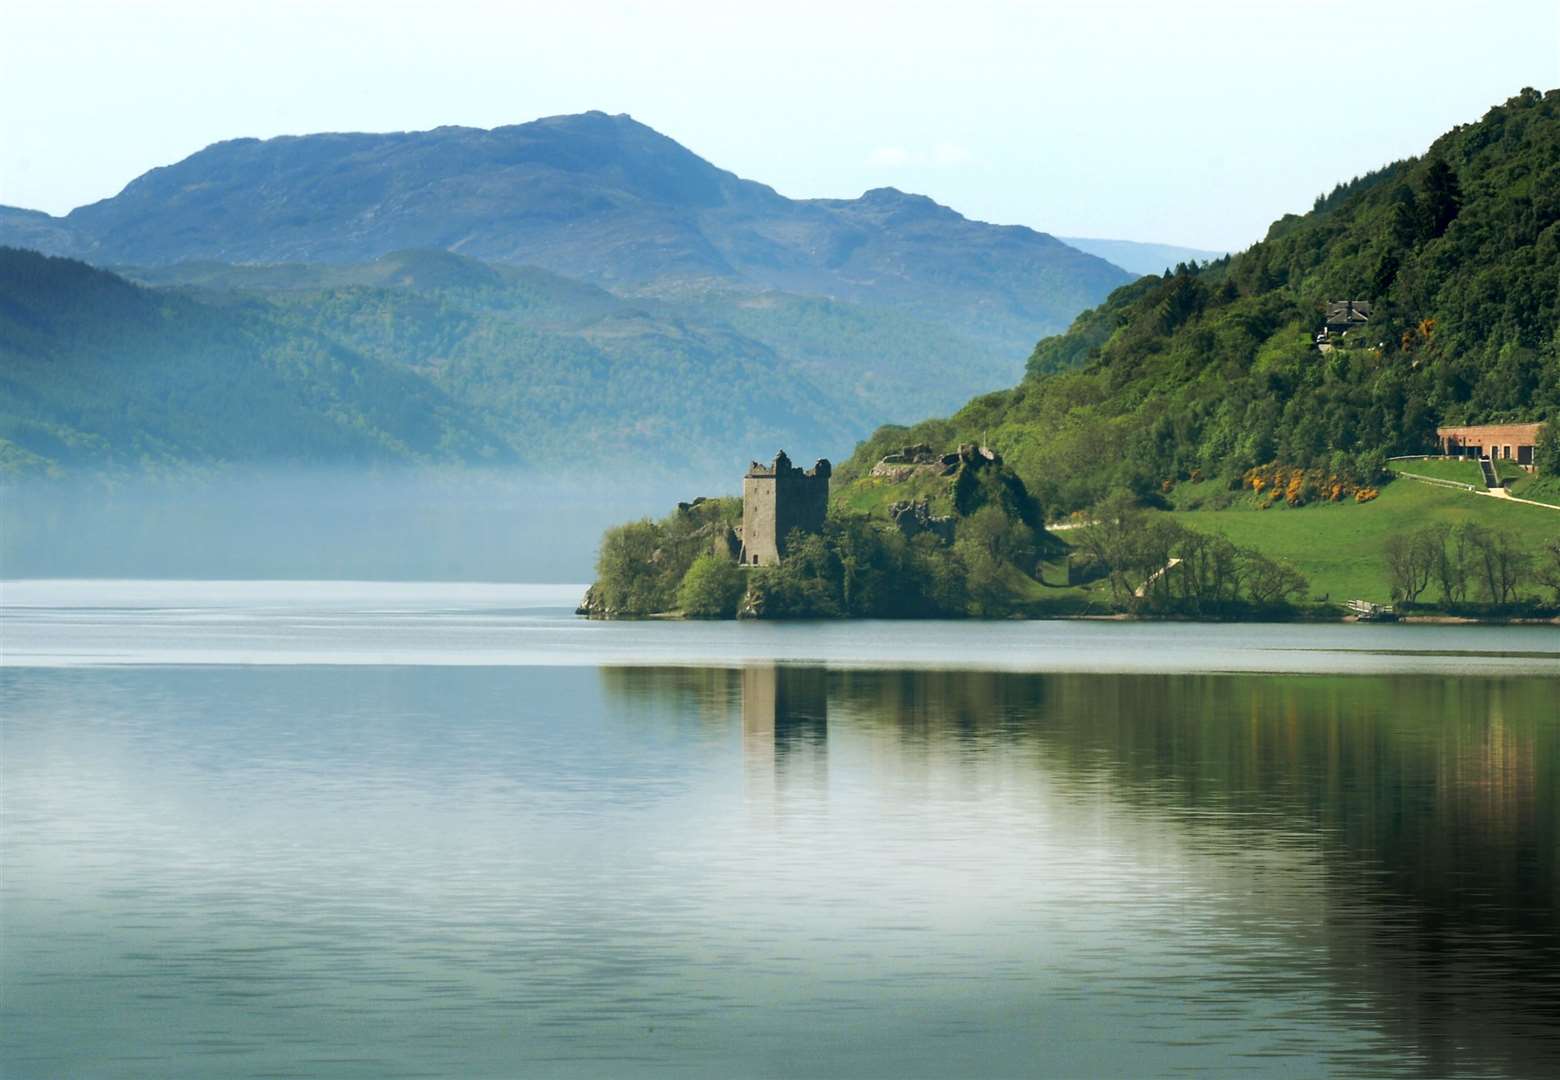 The latest Nessie 'sighting' was captured on film by a couple on holiday in the area.